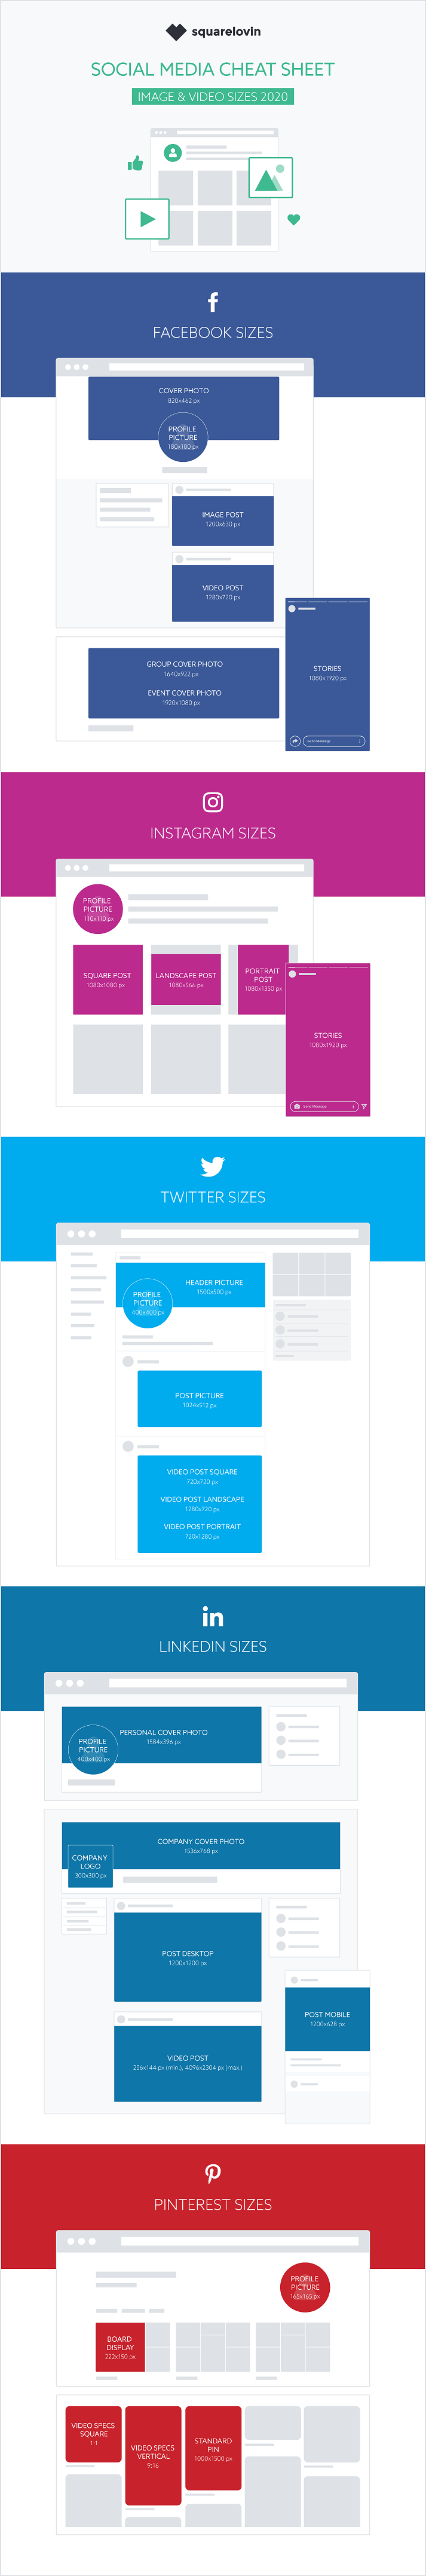 Social Media Image and Video Sizes - Infographic